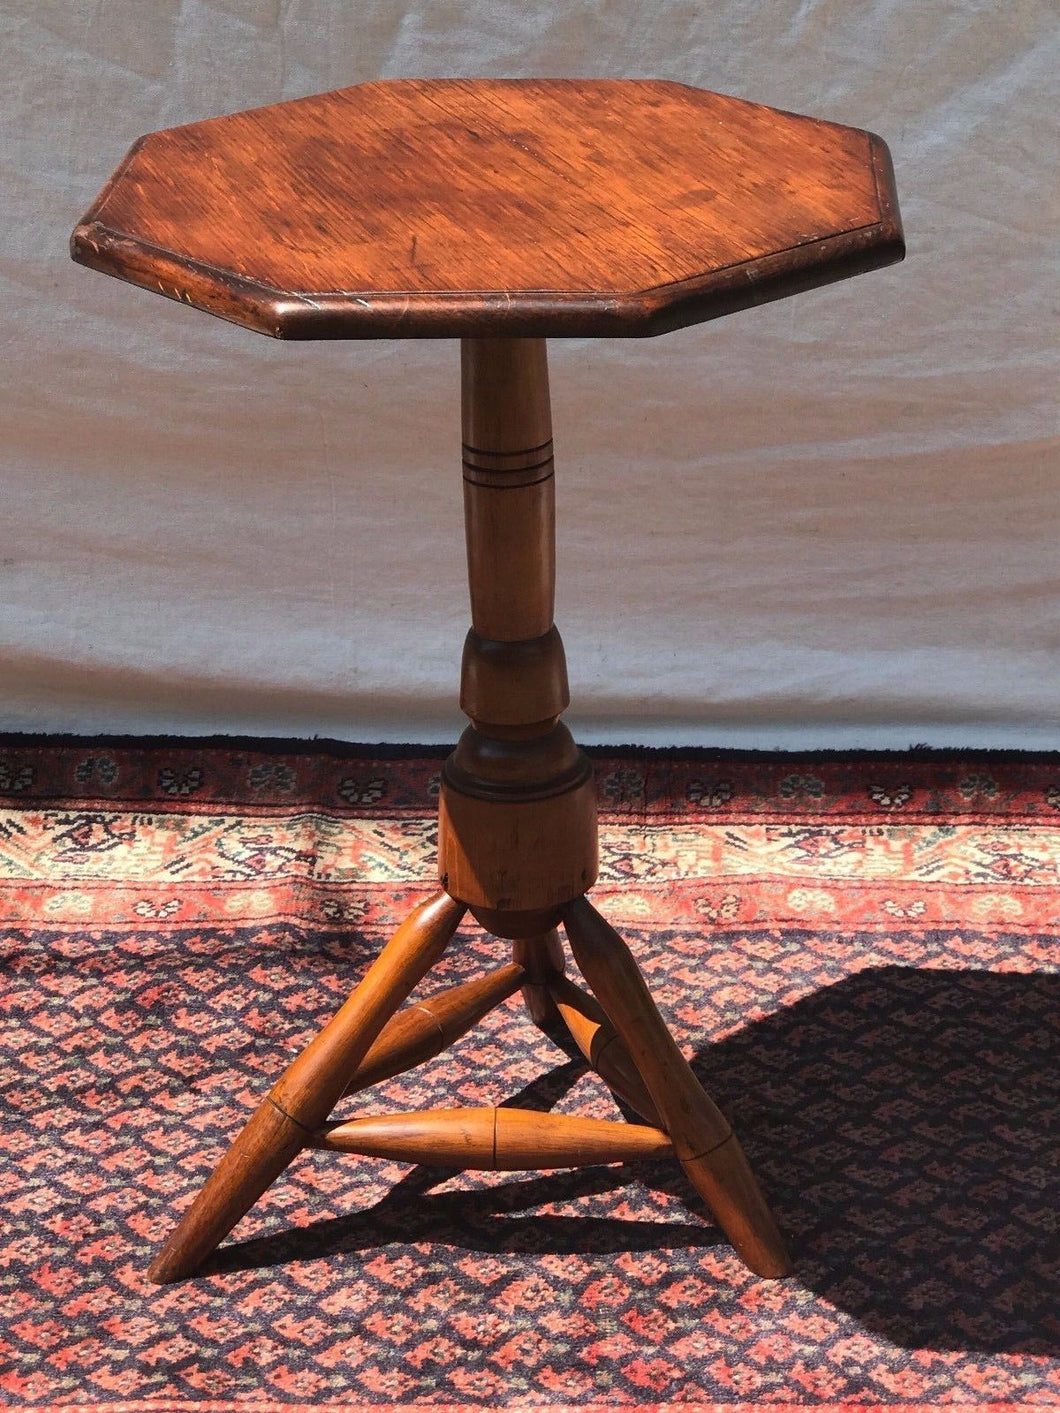 IMPORTANT WILLIAM & MARY EARLY 18TH CENTURY CANDLESTAND WITH RARE STRETCHER BASE